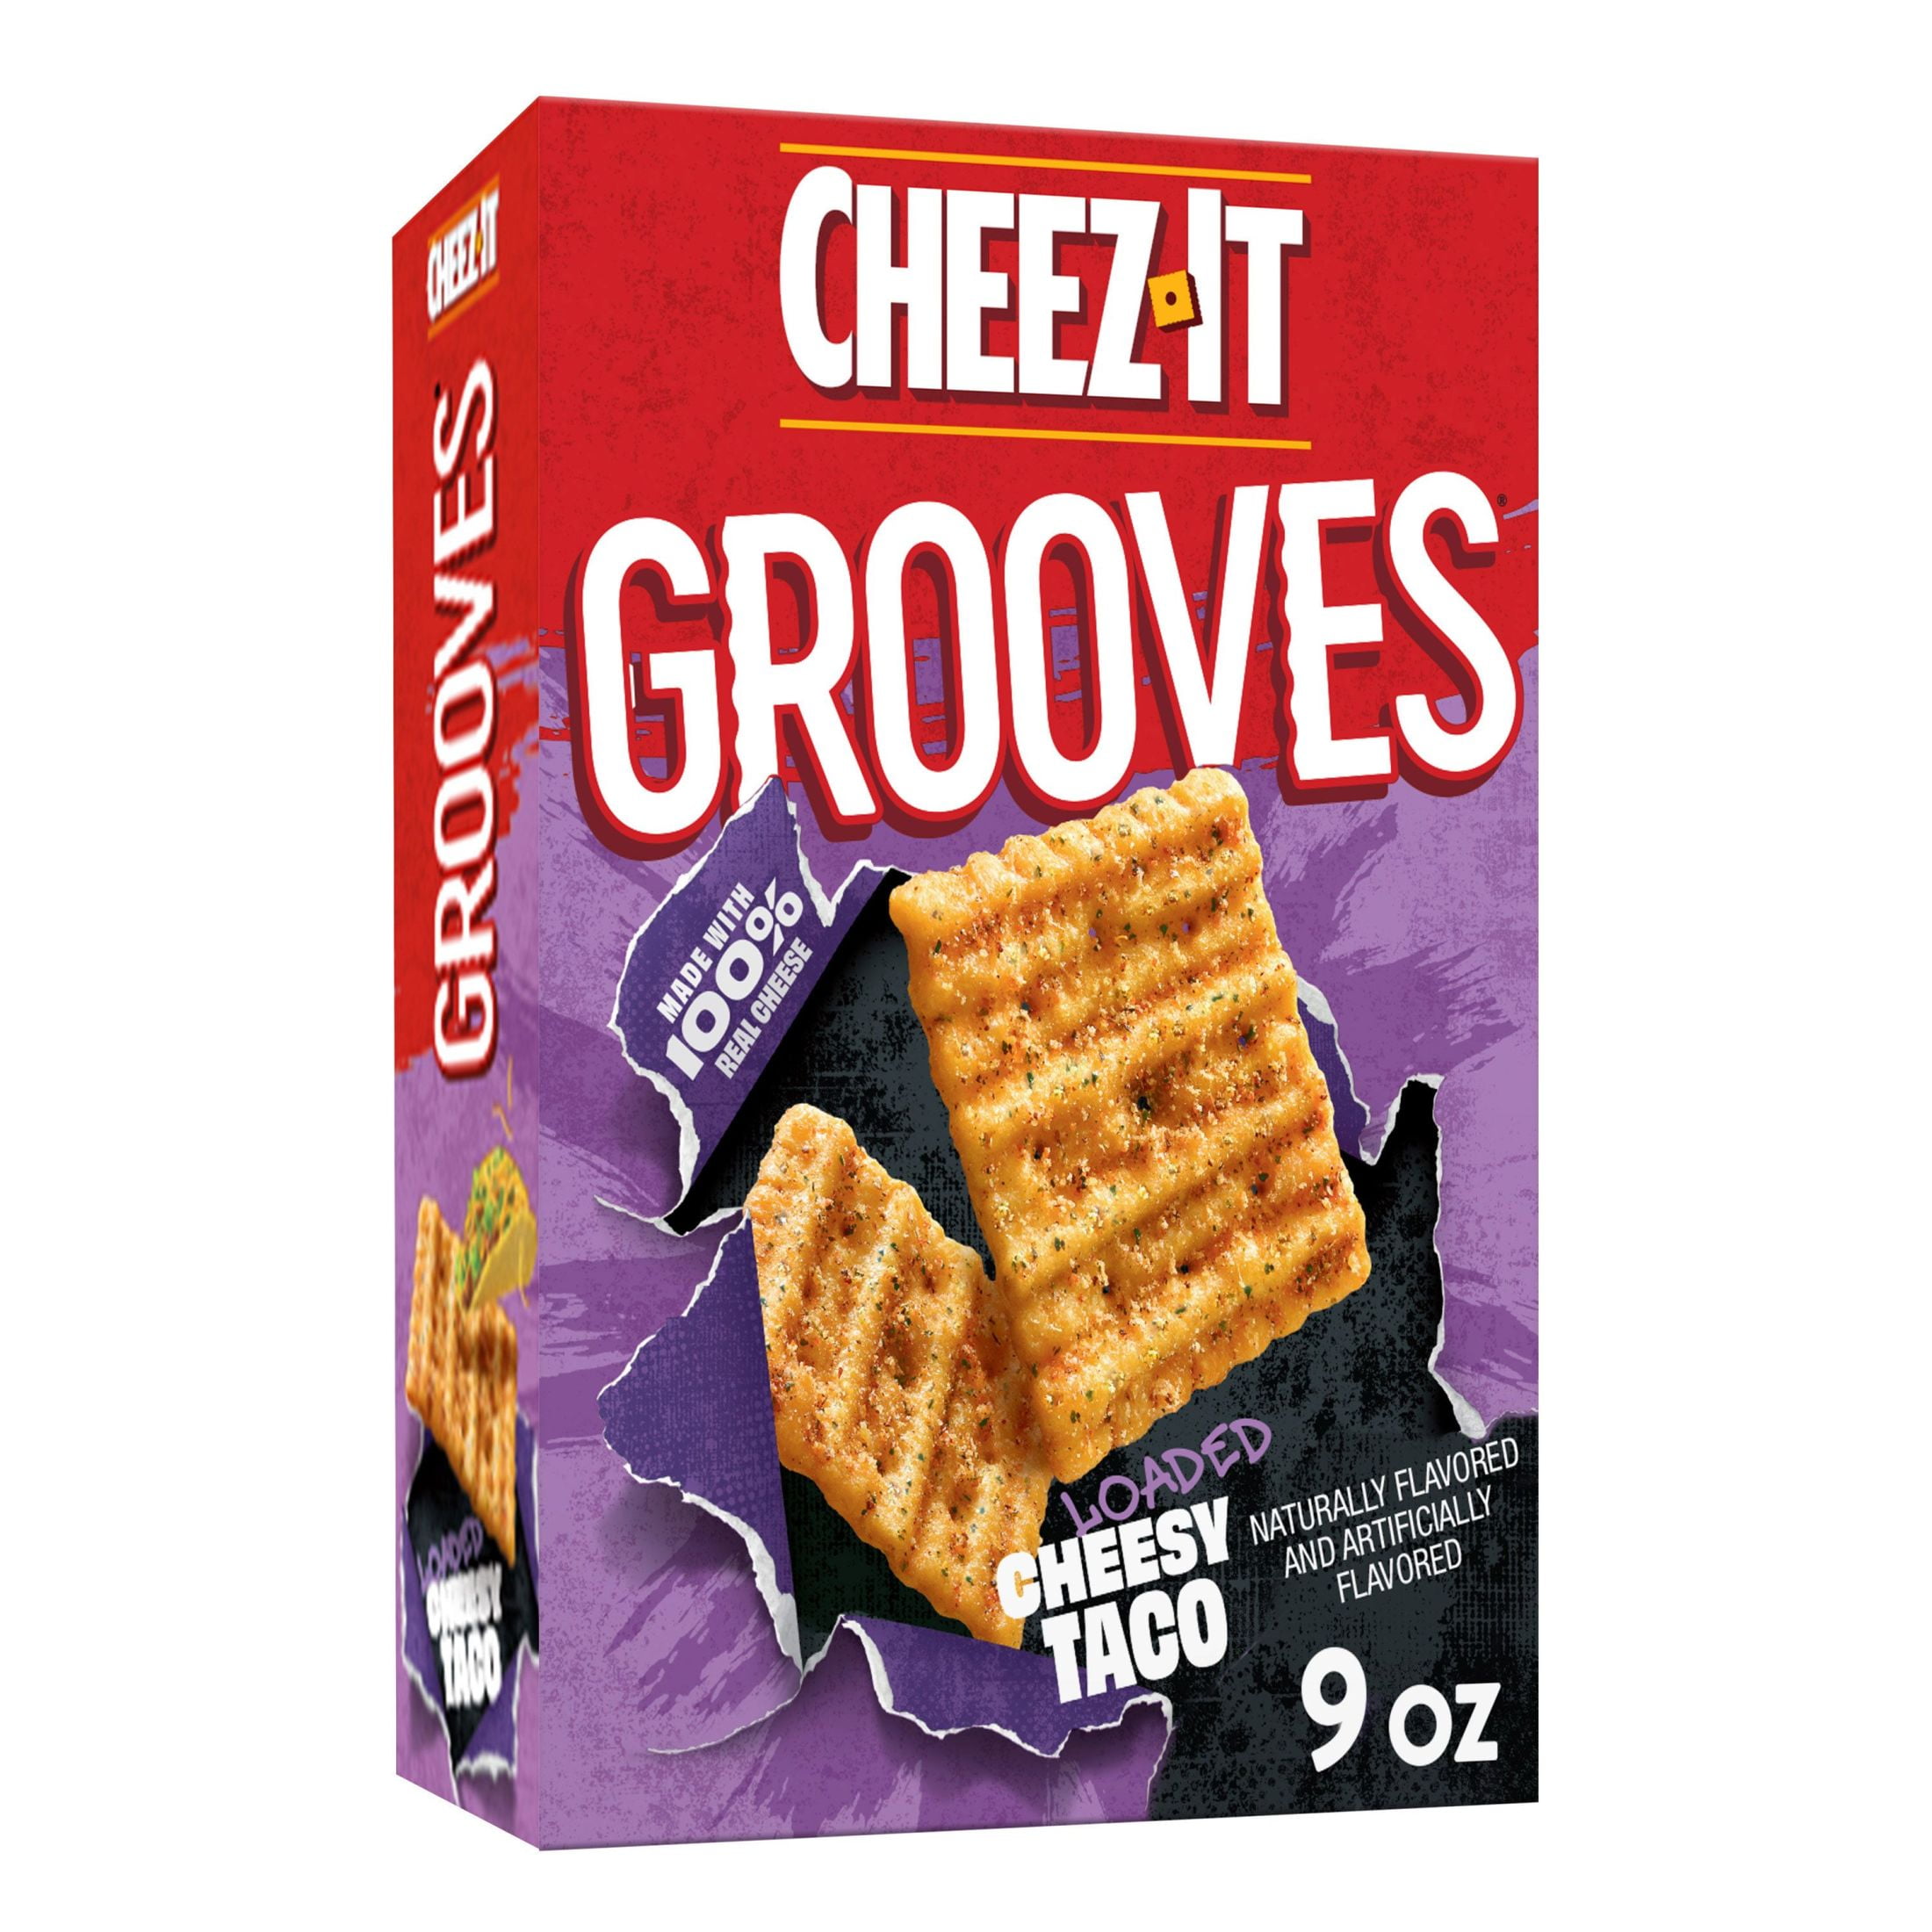 CheezIt Grooves Loaded Cheesy Taco Crunchy Cheese Snack Crackers, 9 oz